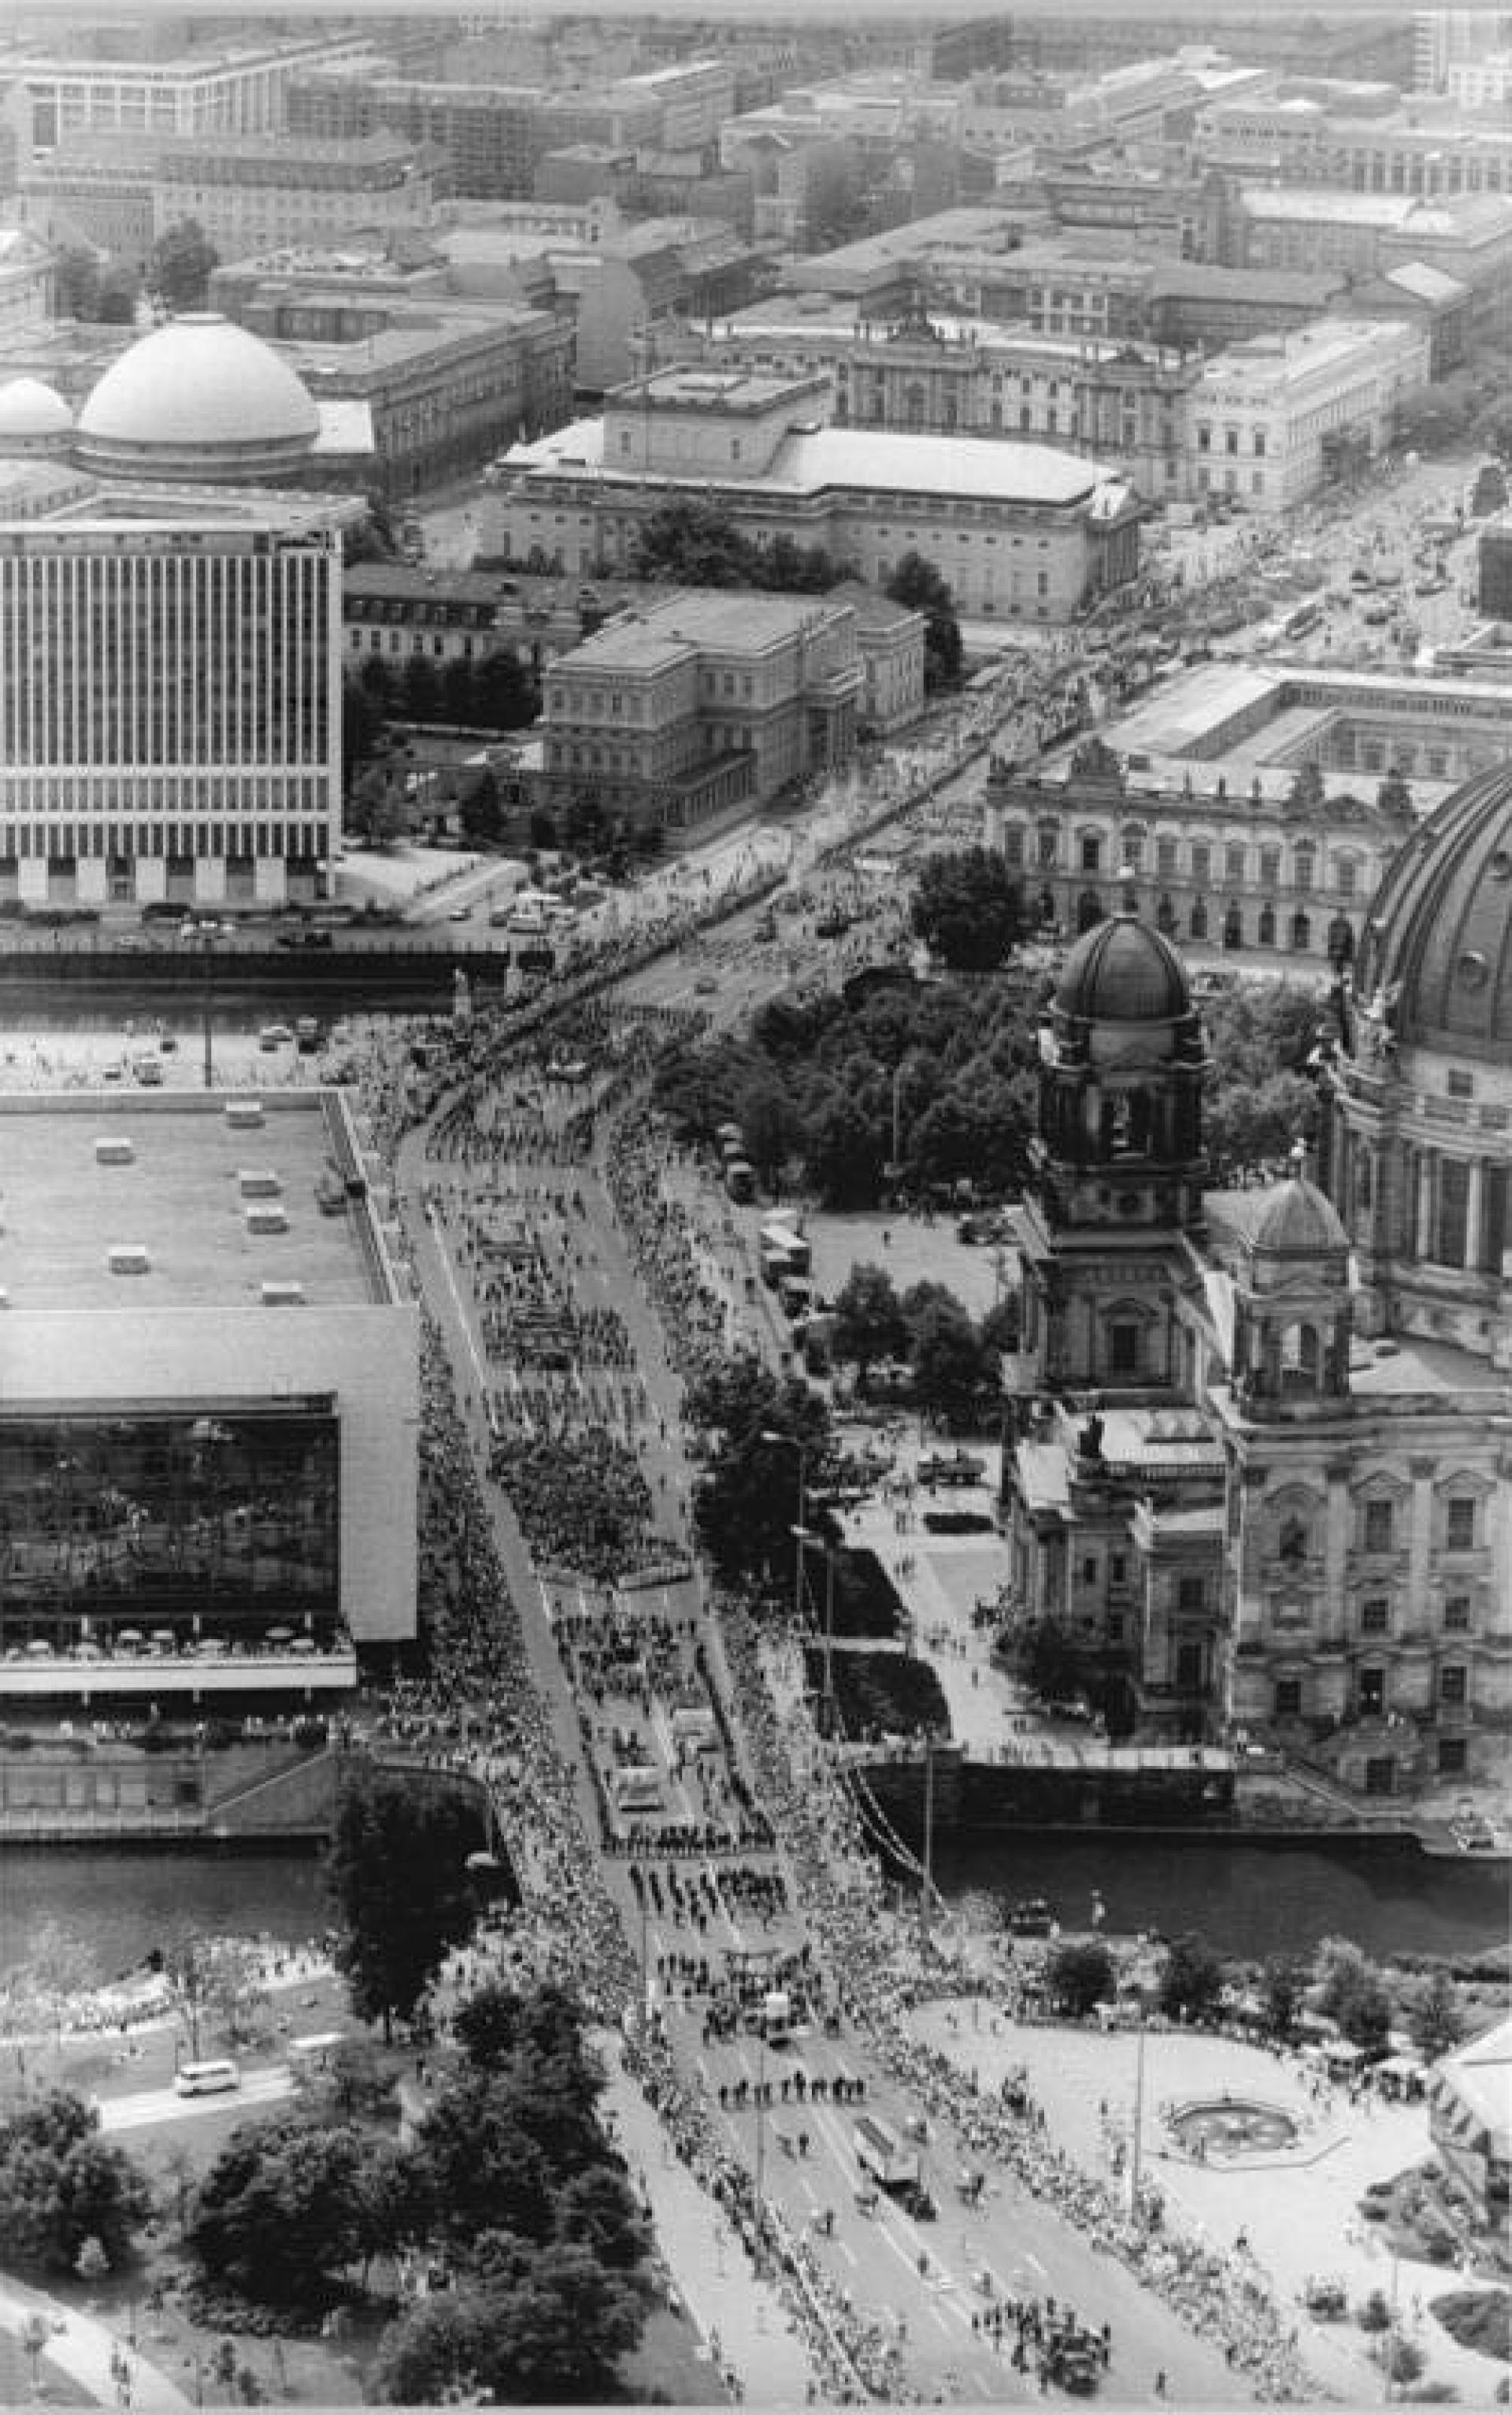 The Palace of the Republic (front left) located between Schlossplatz and the Lustgarten on an island in the River Spree and The Ministry of Foreign Affairs of GDR (back left) located in Schinkelplatz. | Photo via Bundesarchiv